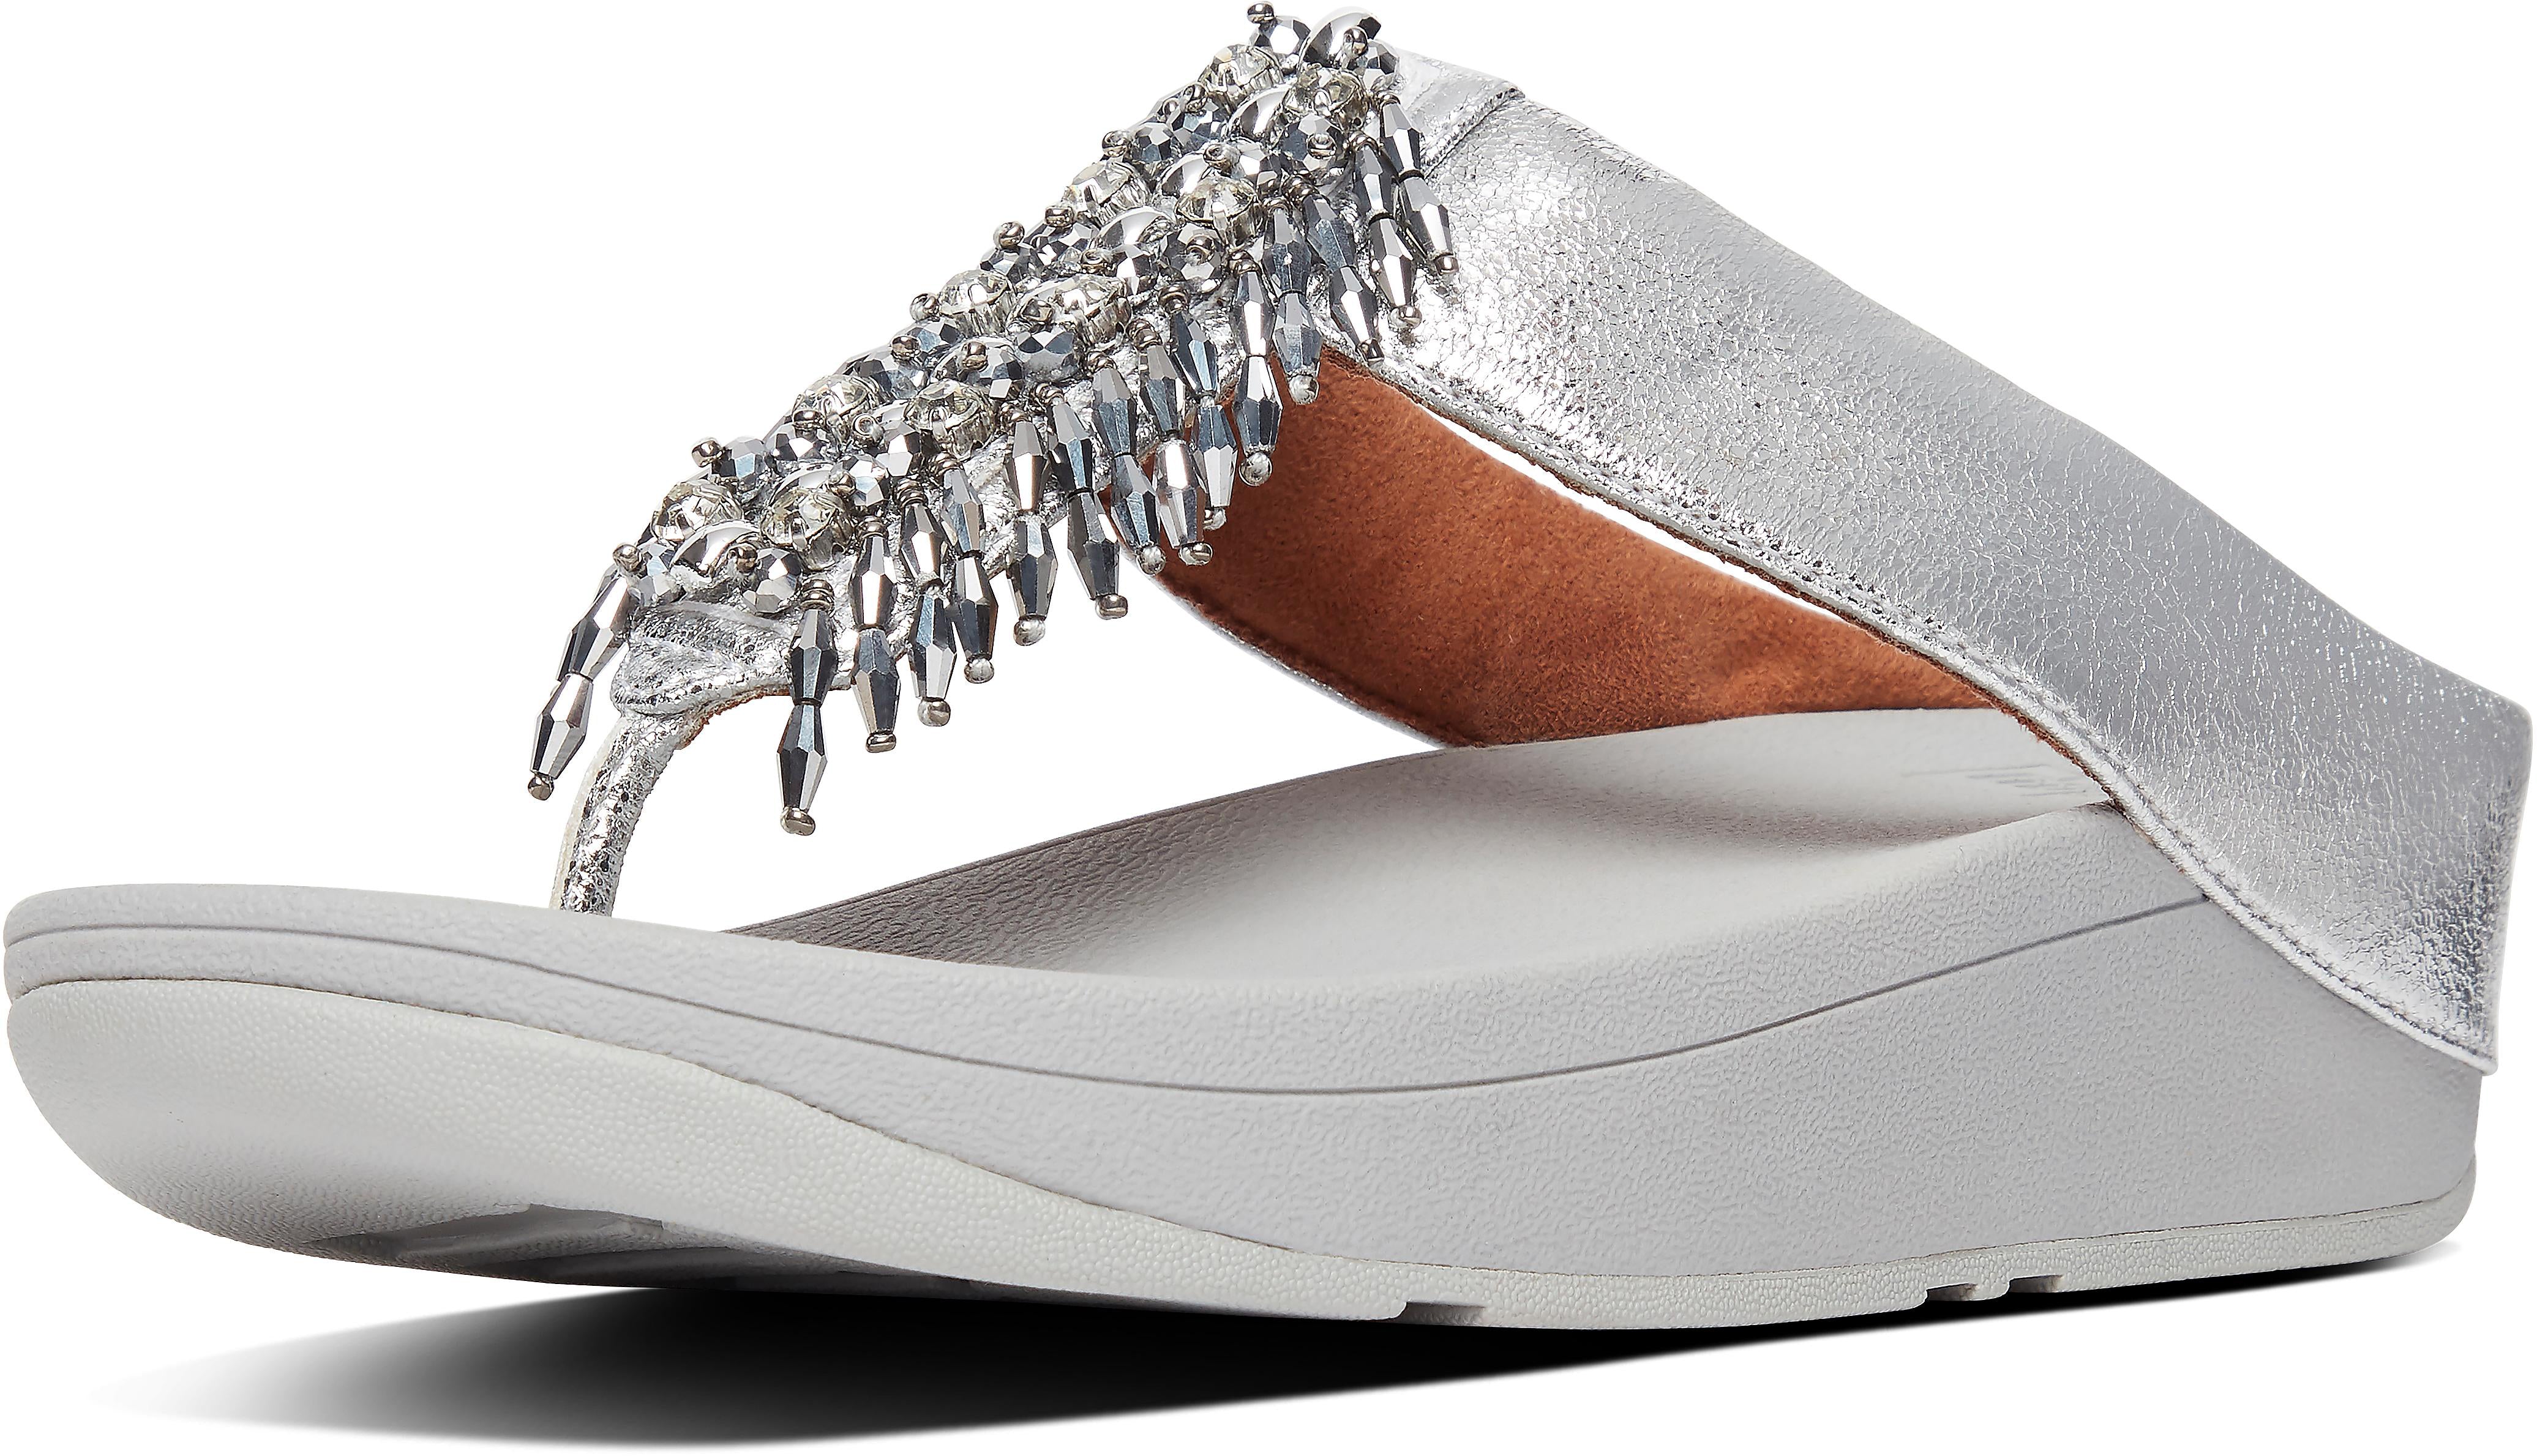 Velma Adorn Toe-Thongs in Silver from the side